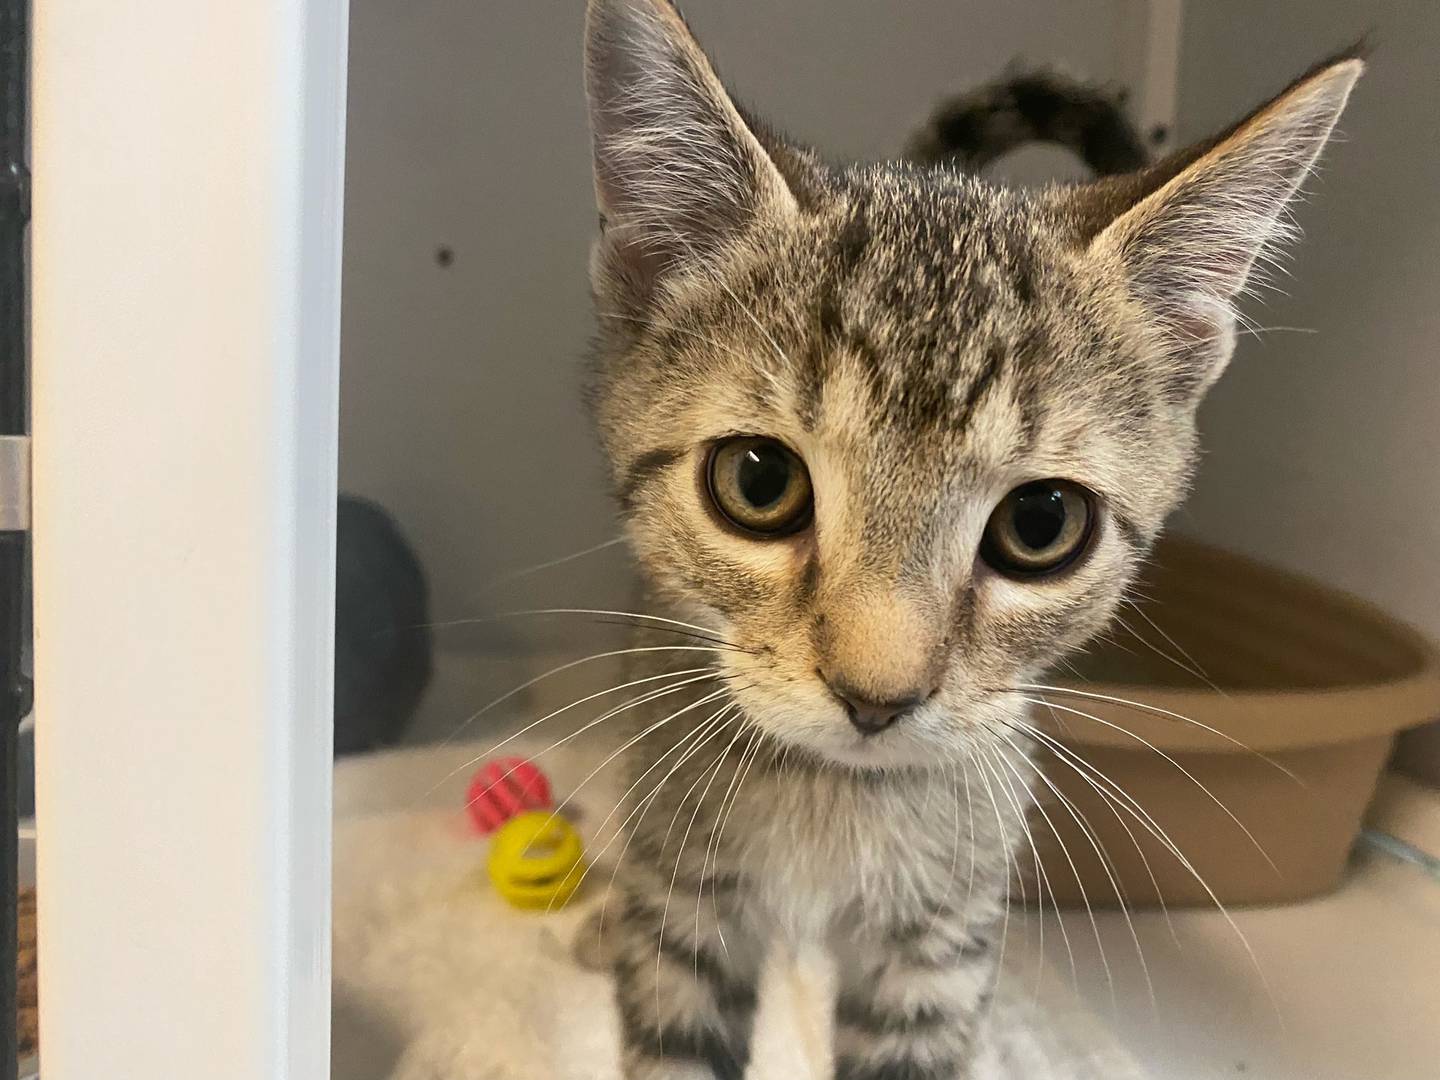 Brisk is an 11-week-old domestic shorthair. He is very playful and loves attention. Brisk is great with other cats and children. He is very loving and affectionate. For more information on Brisk, contact including adoption fees please visit justanimals.org or call 815-448-2510.